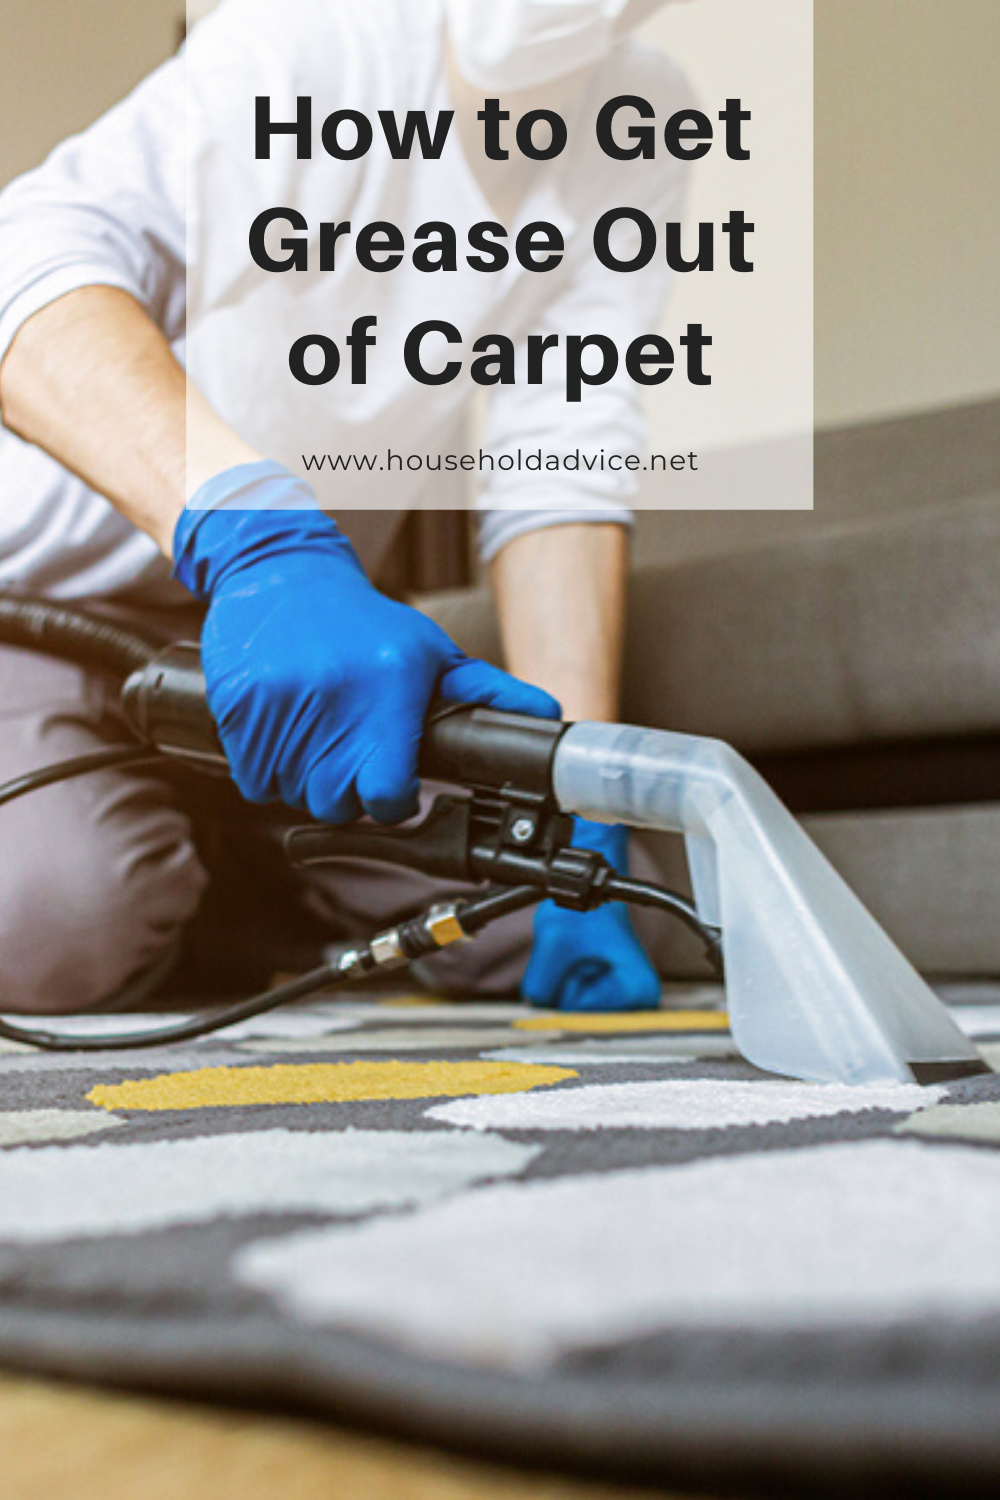 How To Get Mold Out Of Car Carpet : 3 Ways to Get Rid of ...